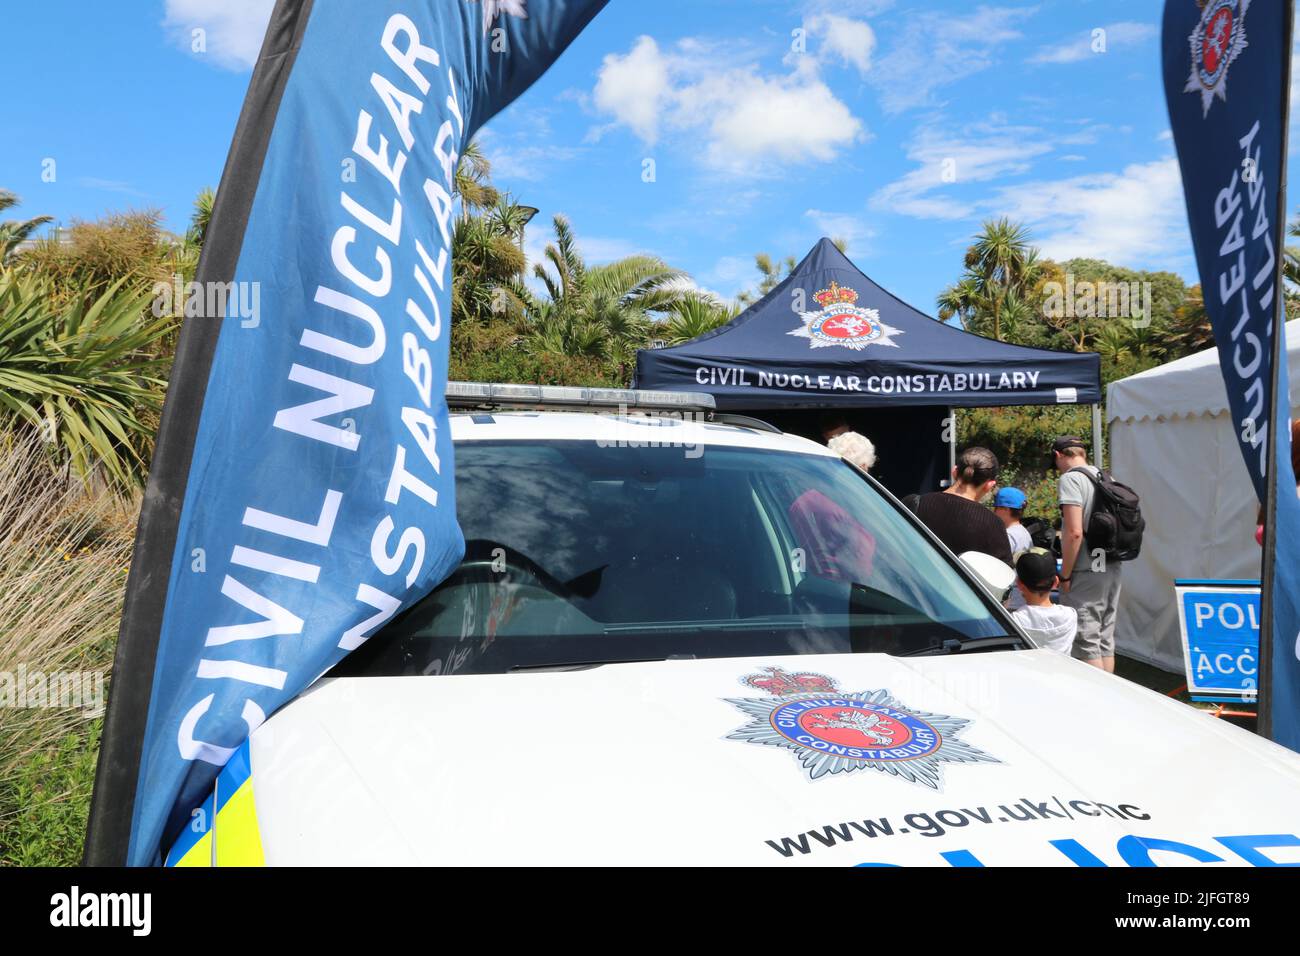 CIVIL NUCLEAR CONSTABULARY POLICE INFORMATION STAND AND POLICE CAR AT A 999 EMERGENCY SERVICES DISPLAY SHOW IN EASTBOURNE Stock Photo